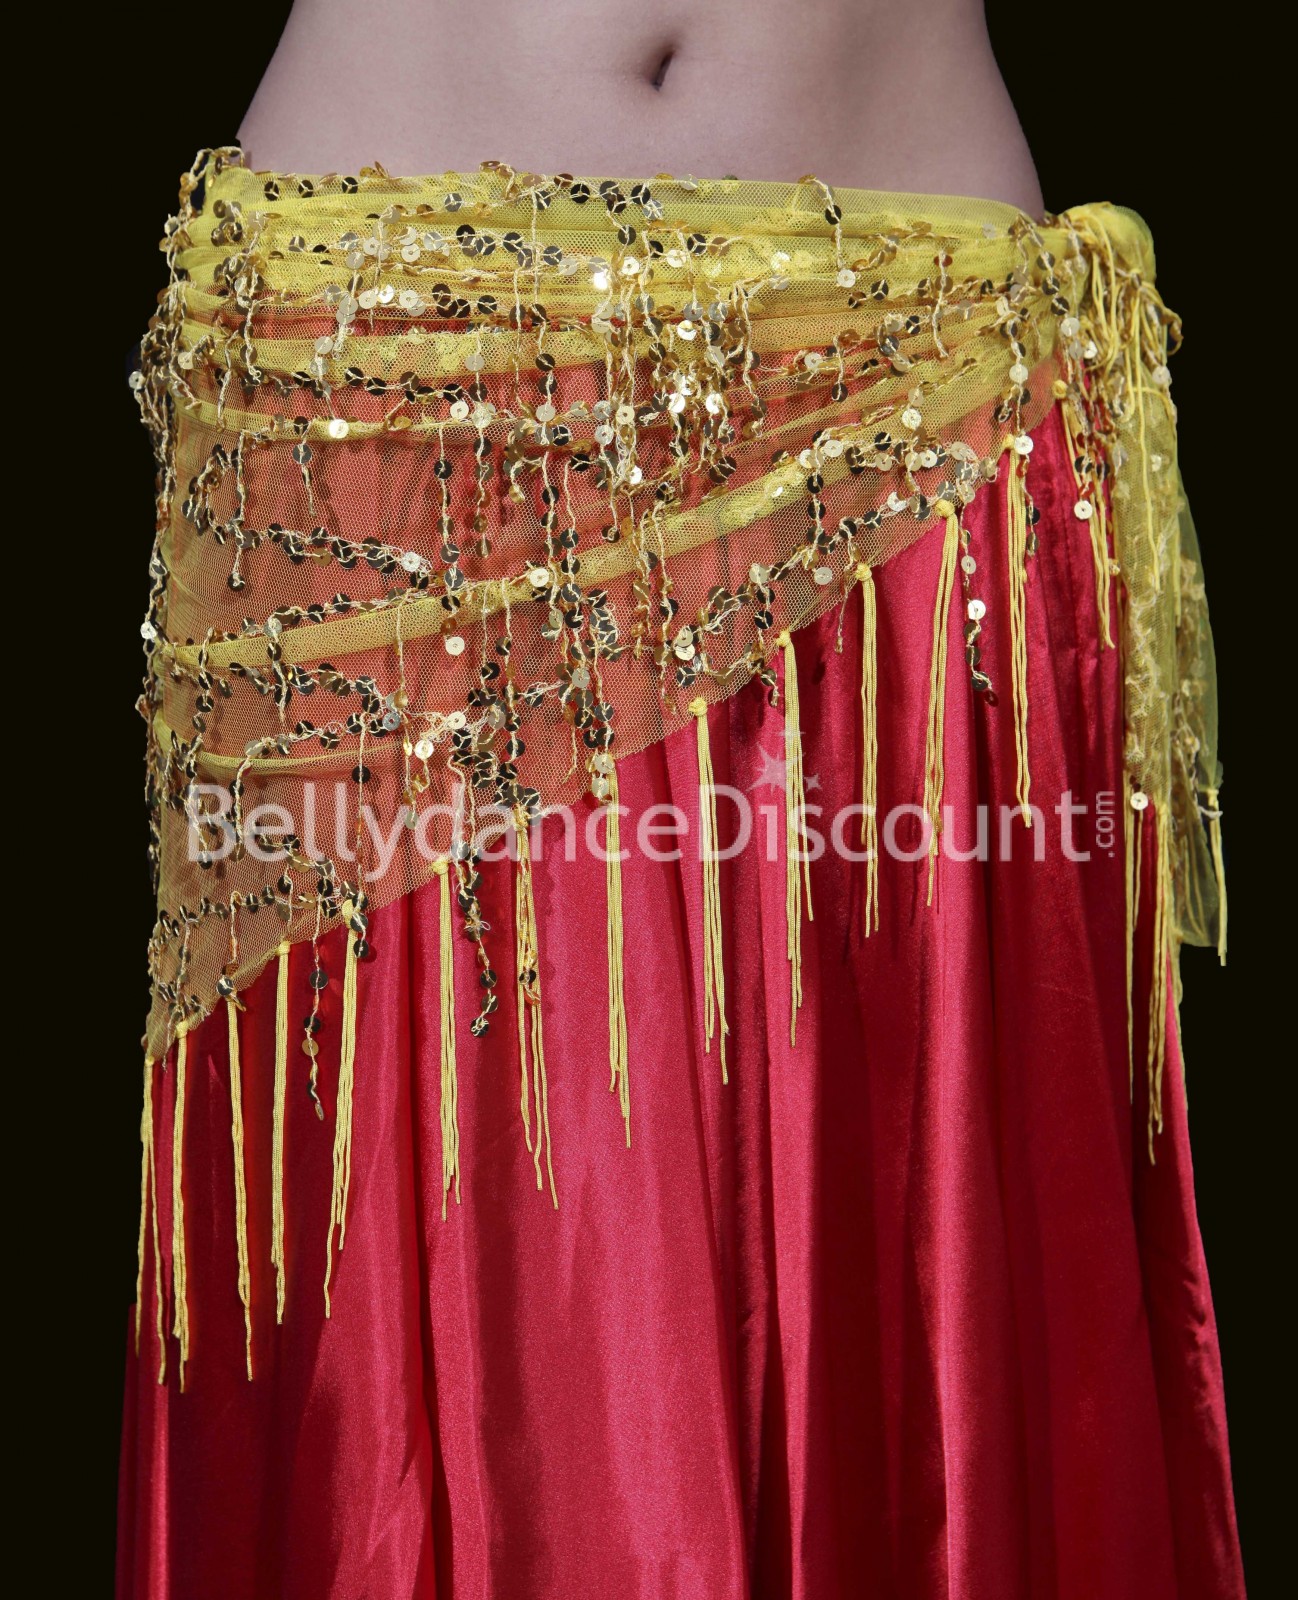 Sparkling yellow and gold Bellydance scarf - 15,50 €